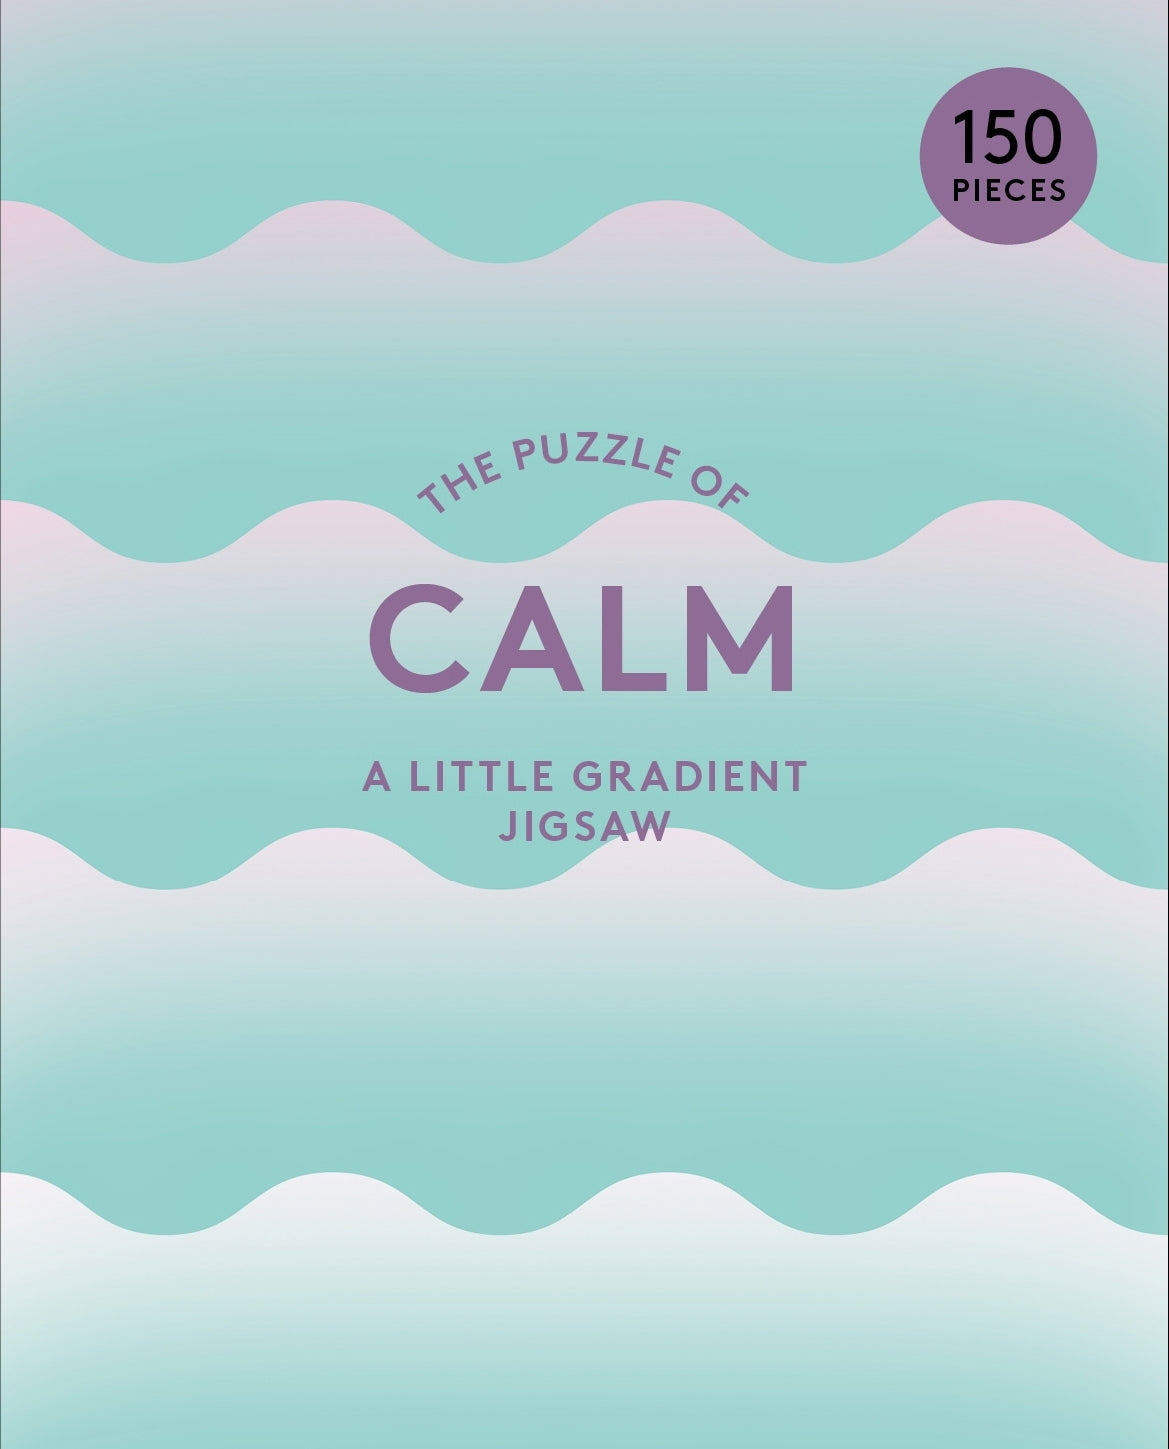 The Puzzle of Calm by Therese Vandling, Susan Broomhall